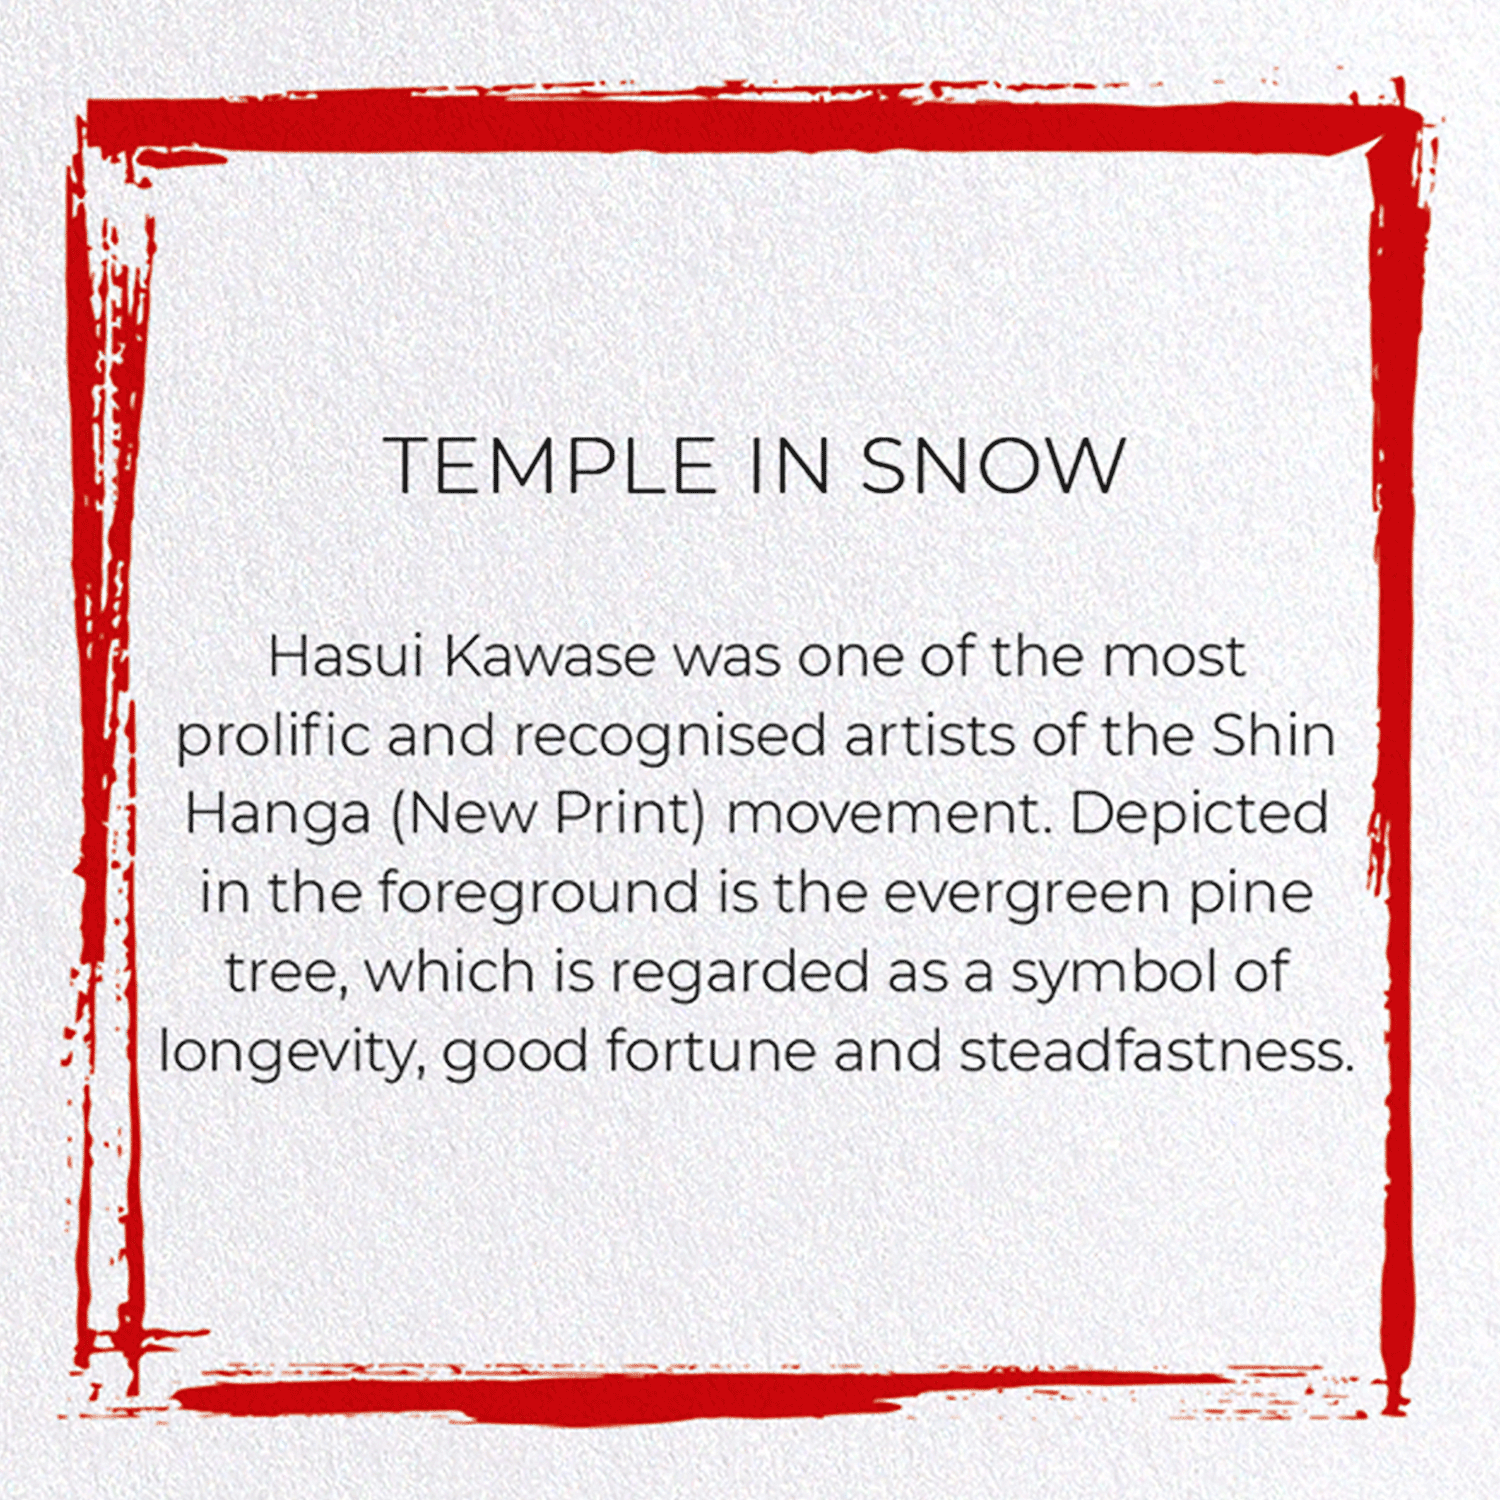 TEMPLE IN SNOW